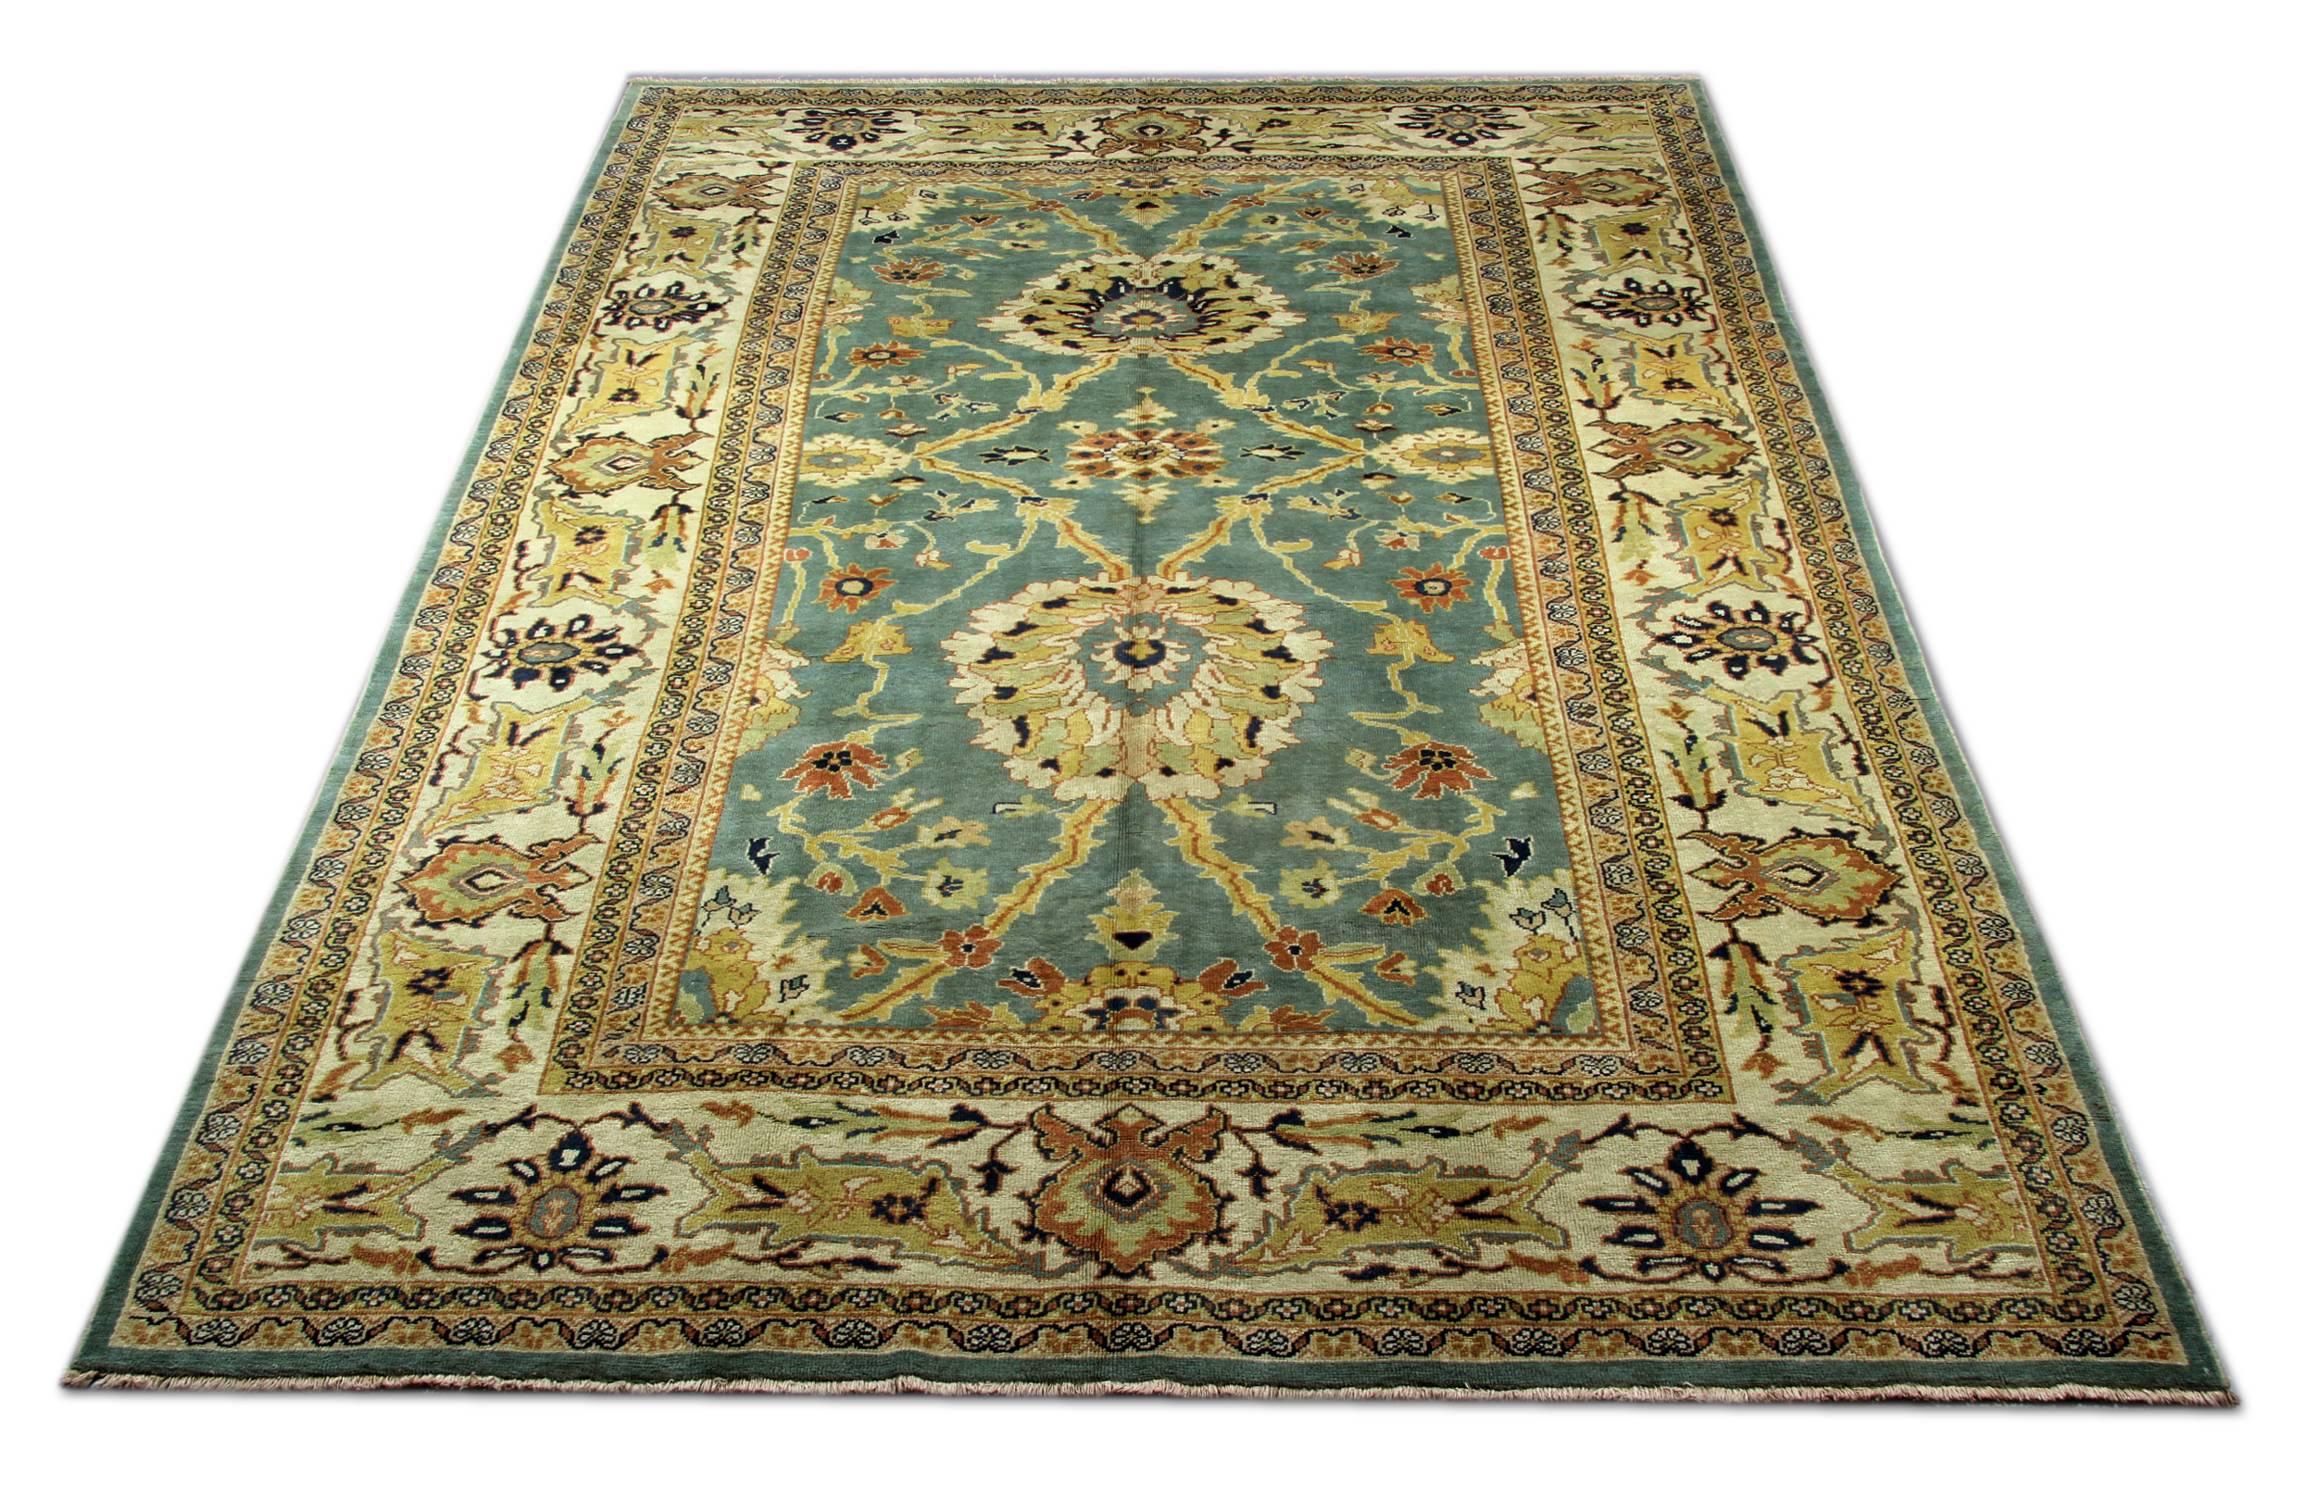 This carpet rug is a Ziegler Sultanabad rug made on our looms by our master weavers in Iran. This floral rug is handmade with all natural veg dyes all hand spun wool. The large-scale design of these vintage rugs makes Sultanabad regarded as the most